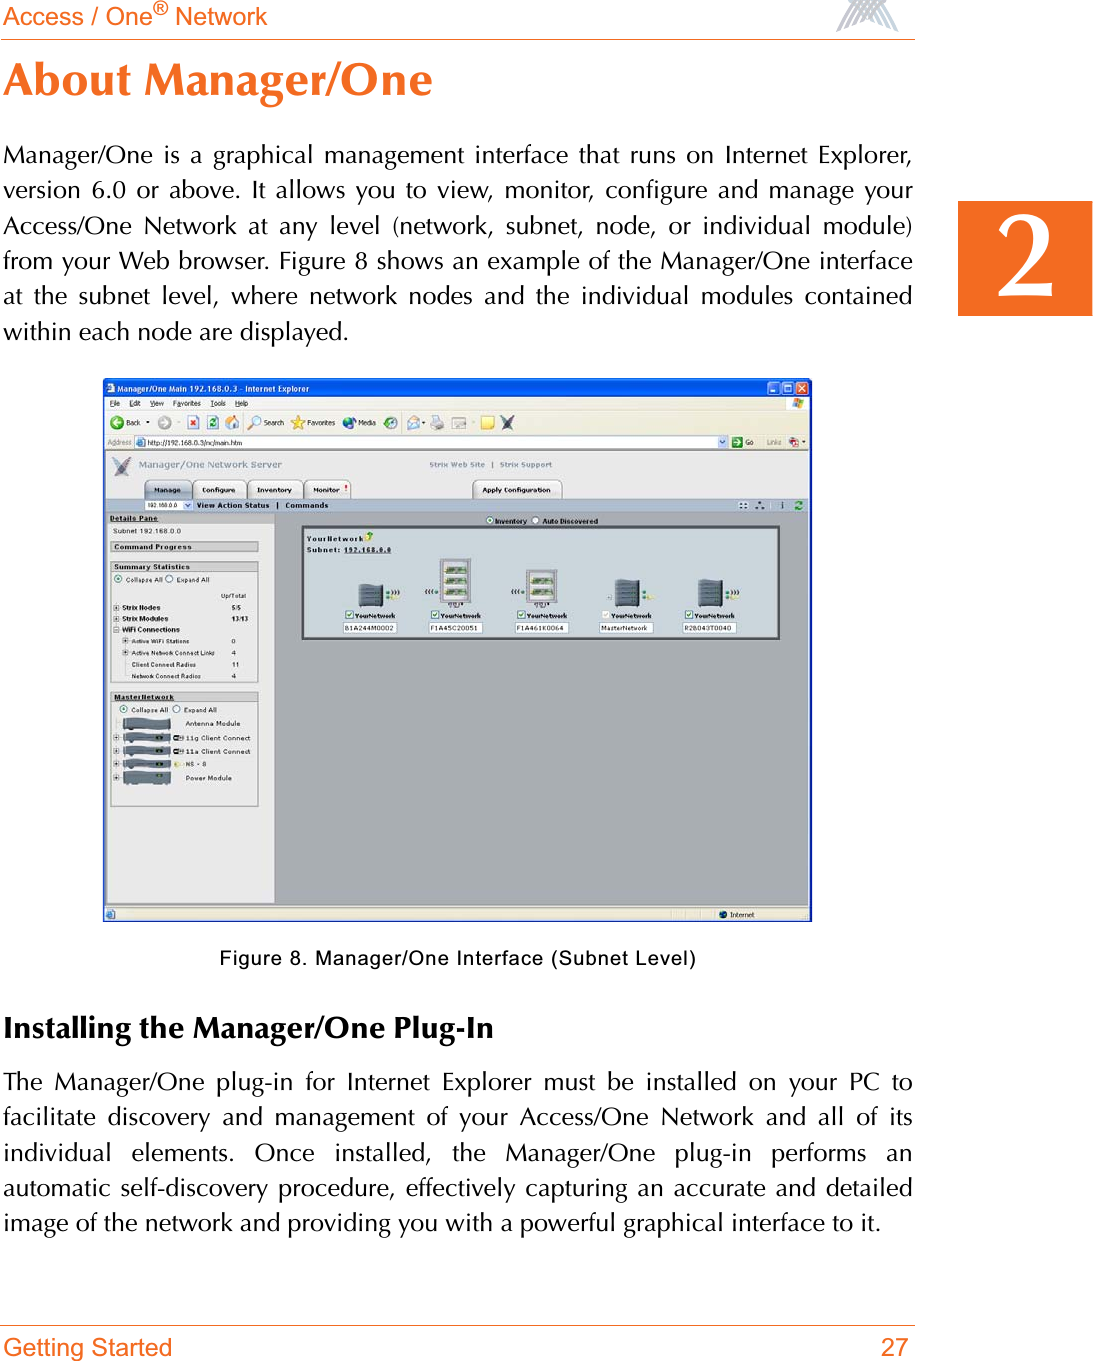 Access / One® NetworkGetting Started 272About Manager/OneManager/One is a graphical management interface that runs on Internet Explorer,version 6.0 or above. It allows you to view, monitor, configure and manage yourAccess/One Network at any level (network, subnet, node, or individual module)from your Web browser. Figure 8 shows an example of the Manager/One interfaceat the subnet level, where network nodes and the individual modules containedwithin each node are displayed.Figure 8. Manager/One Interface (Subnet Level)Installing the Manager/One Plug-InThe Manager/One plug-in for Internet Explorer must be installed on your PC tofacilitate discovery and management of your Access/One Network and all of itsindividual elements. Once installed, the Manager/One plug-in performs anautomatic self-discovery procedure, effectively capturing an accurate and detailedimage of the network and providing you with a powerful graphical interface to it.